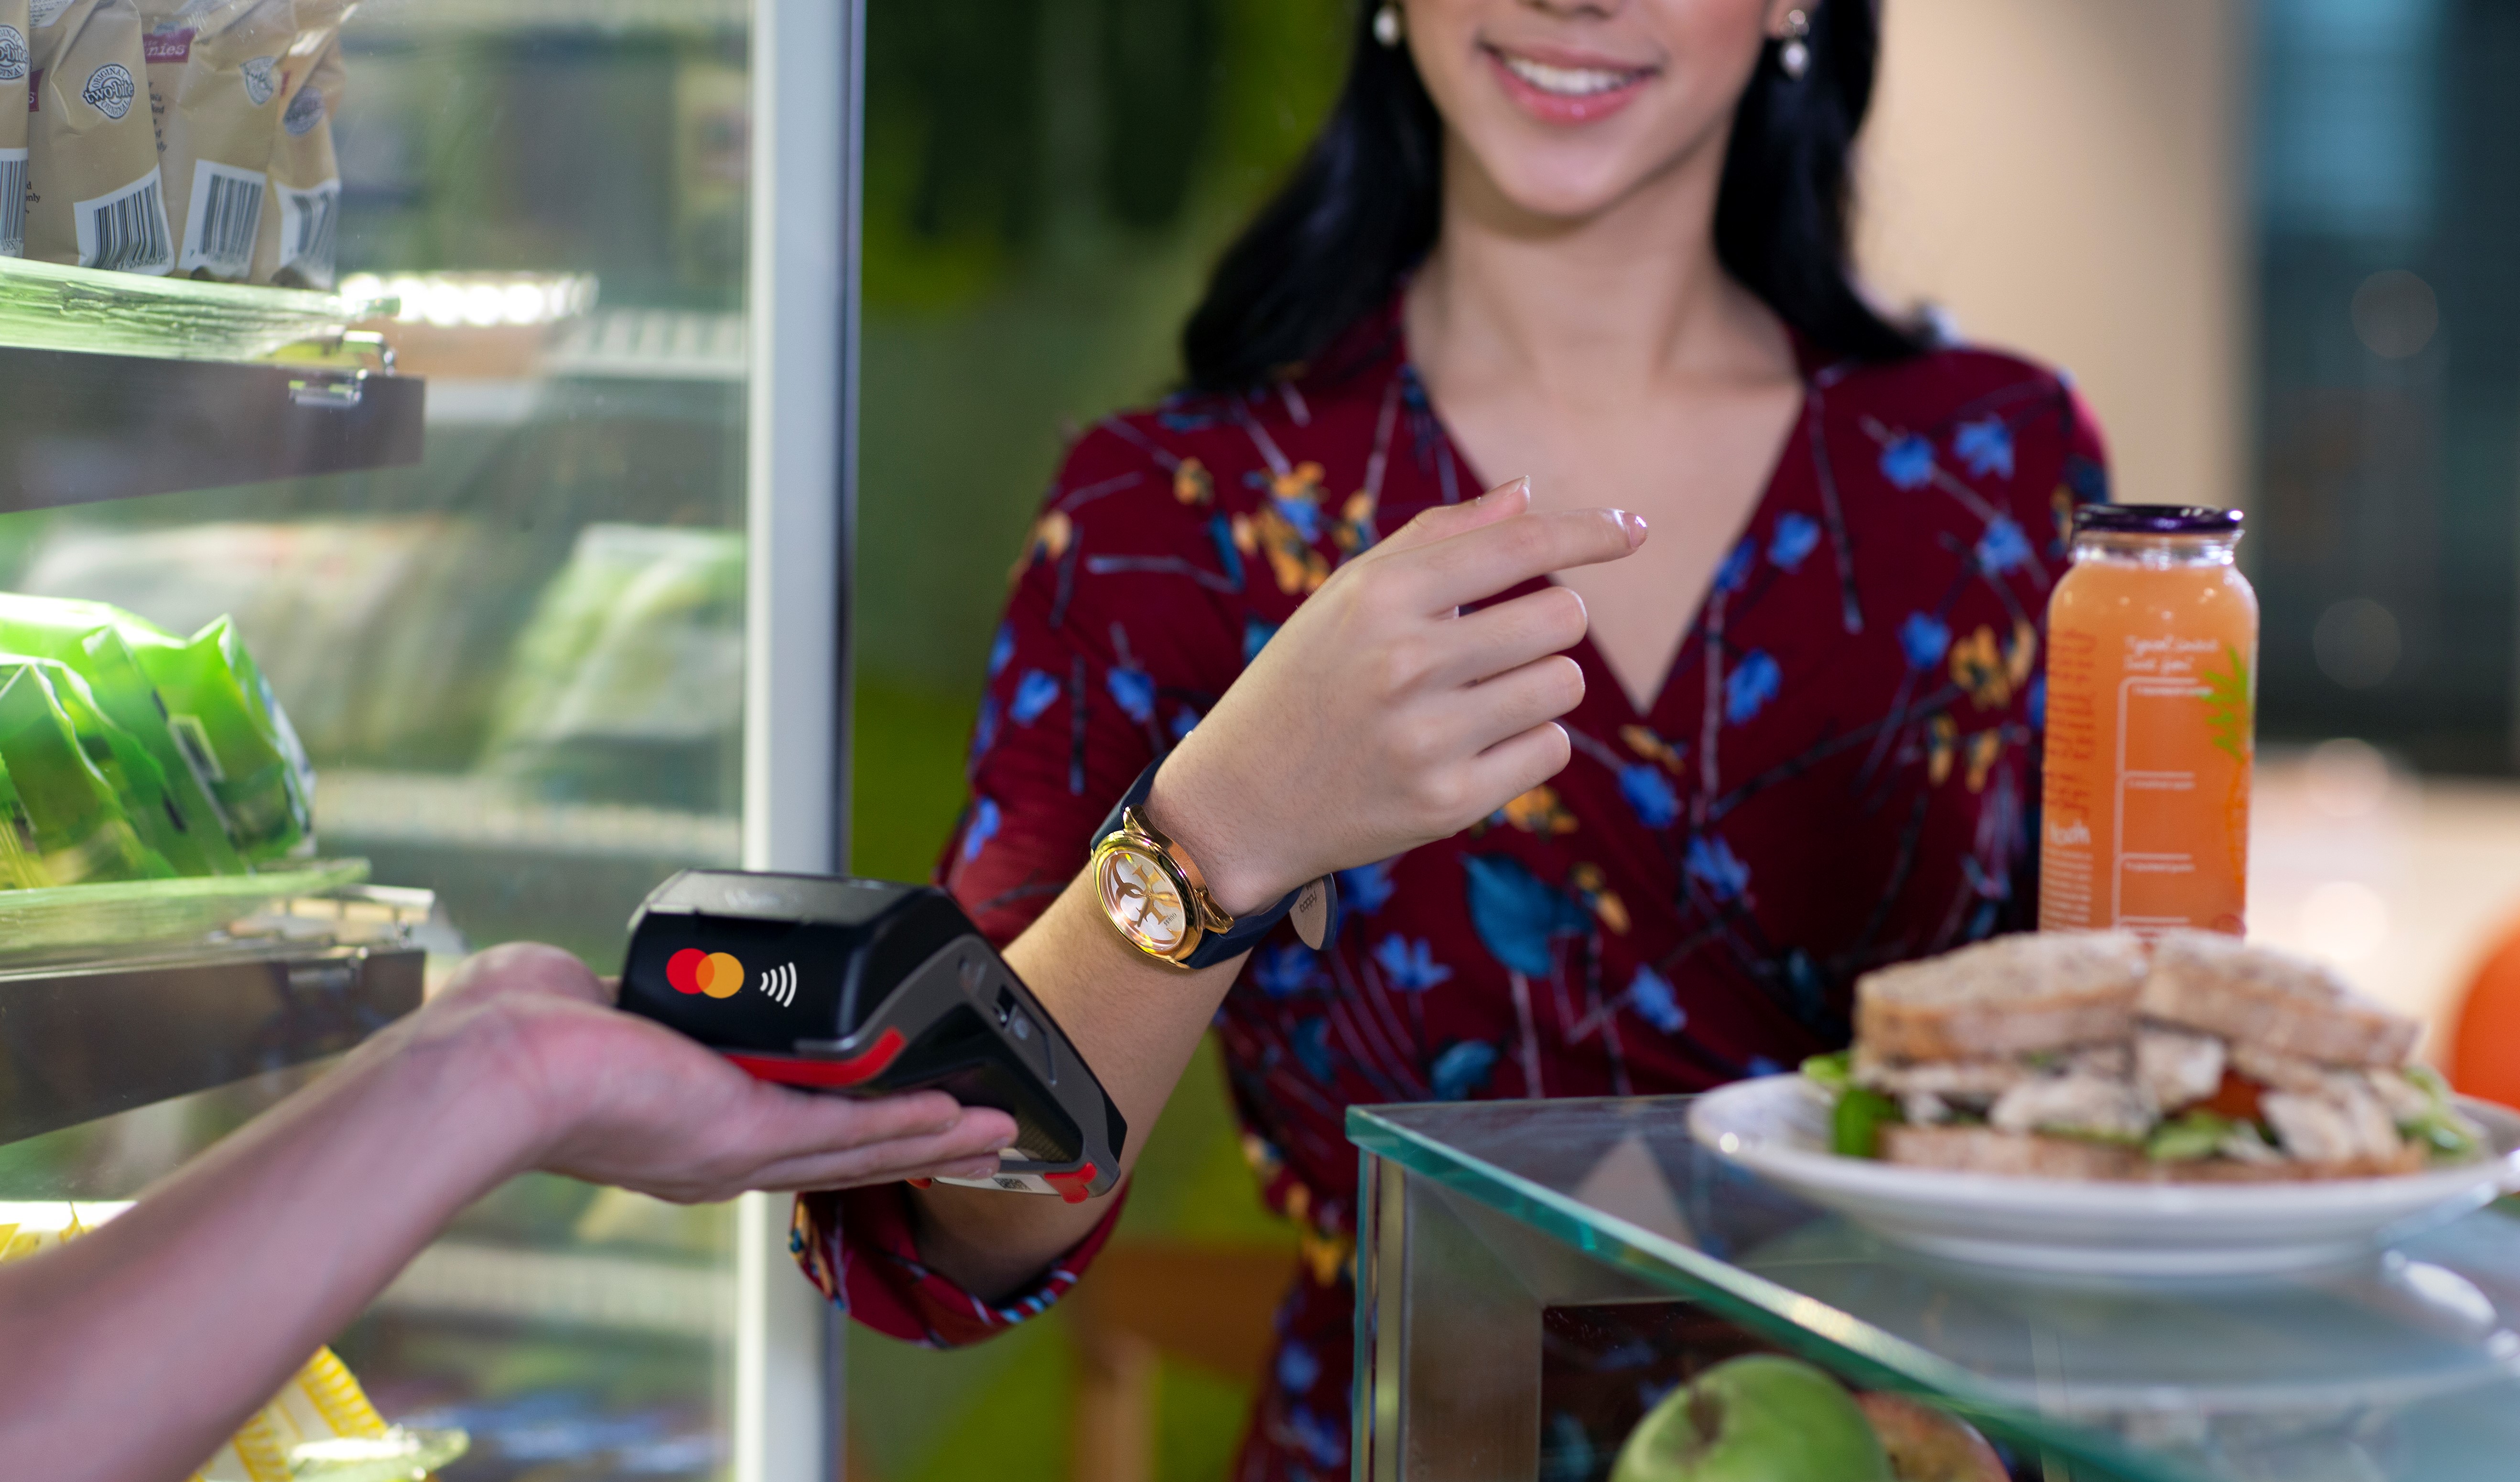 The three-way collaboration will enable MatchMove Mastercard® cardholders to easily and securely add their payment cards to a chip which can turn accessories into payment-ready wearables.